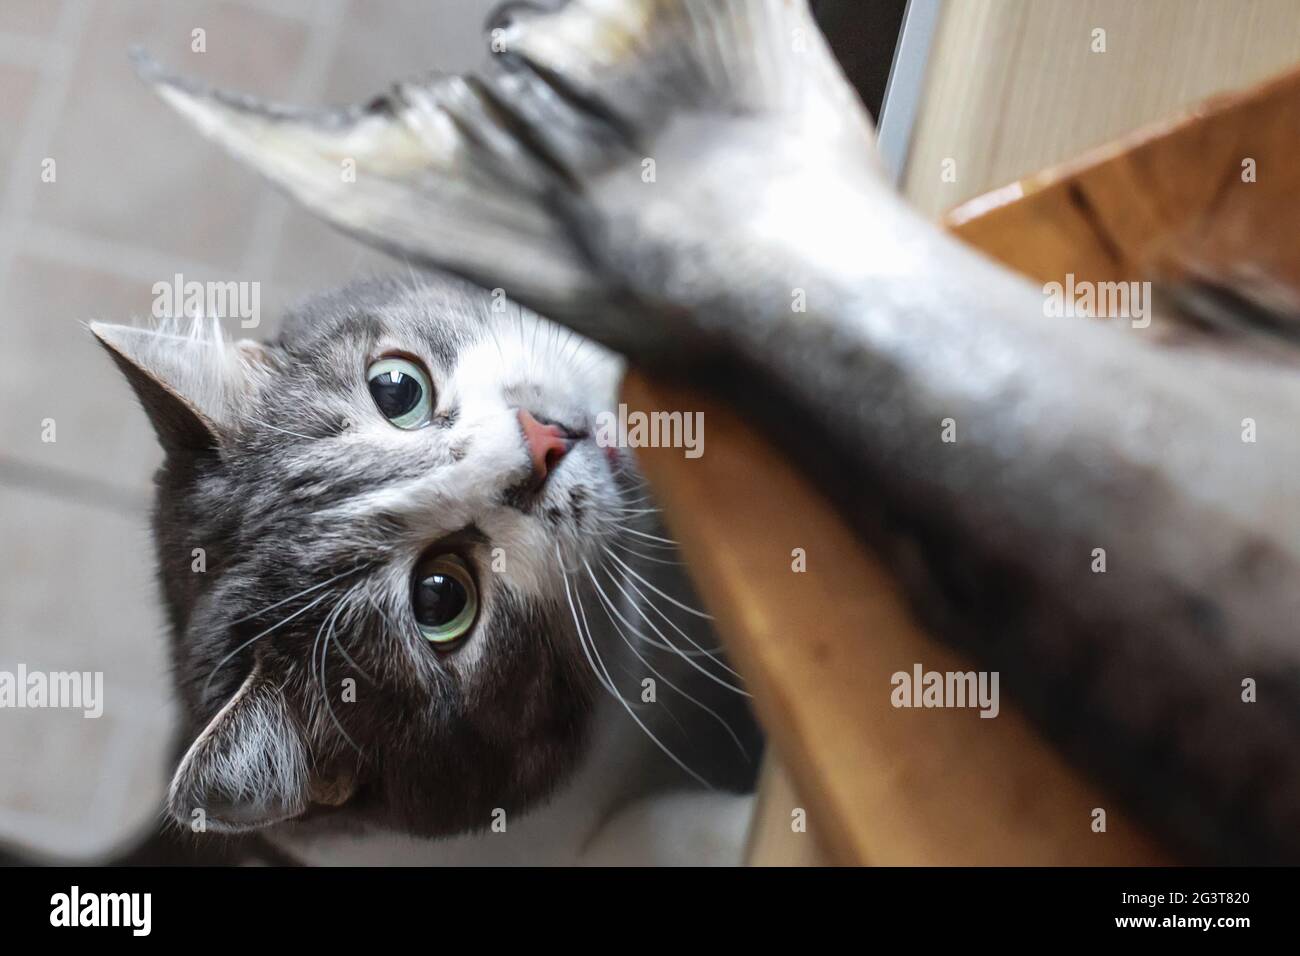 A hungry cat looks at the tail of a fish on the kitchen table. A pet steals food from the table. Stock Photo